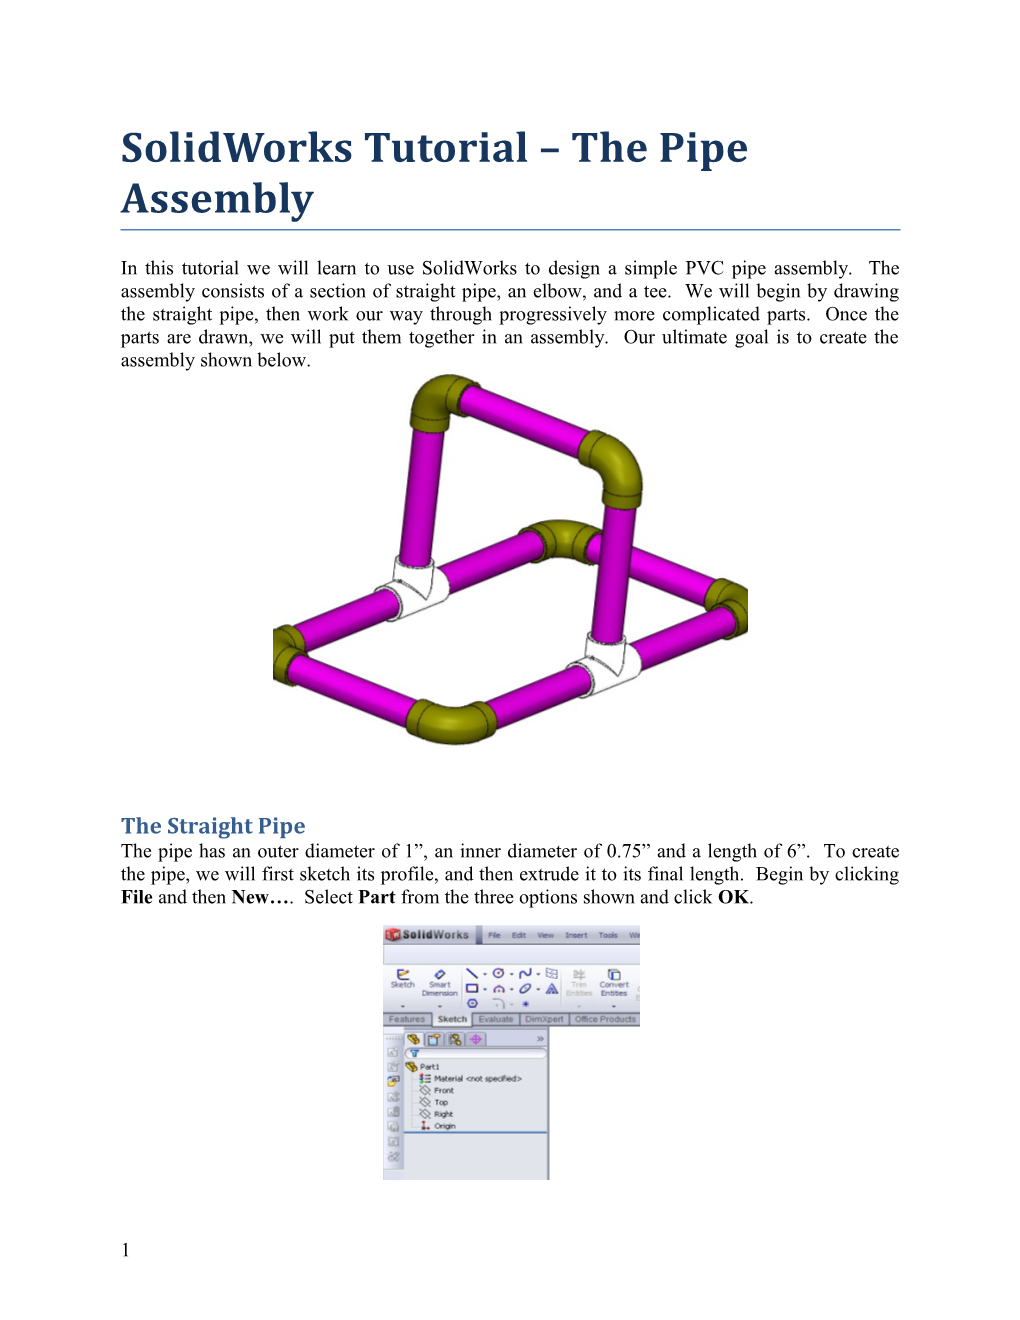 Solidworks Tutorial the Pipe Assembly